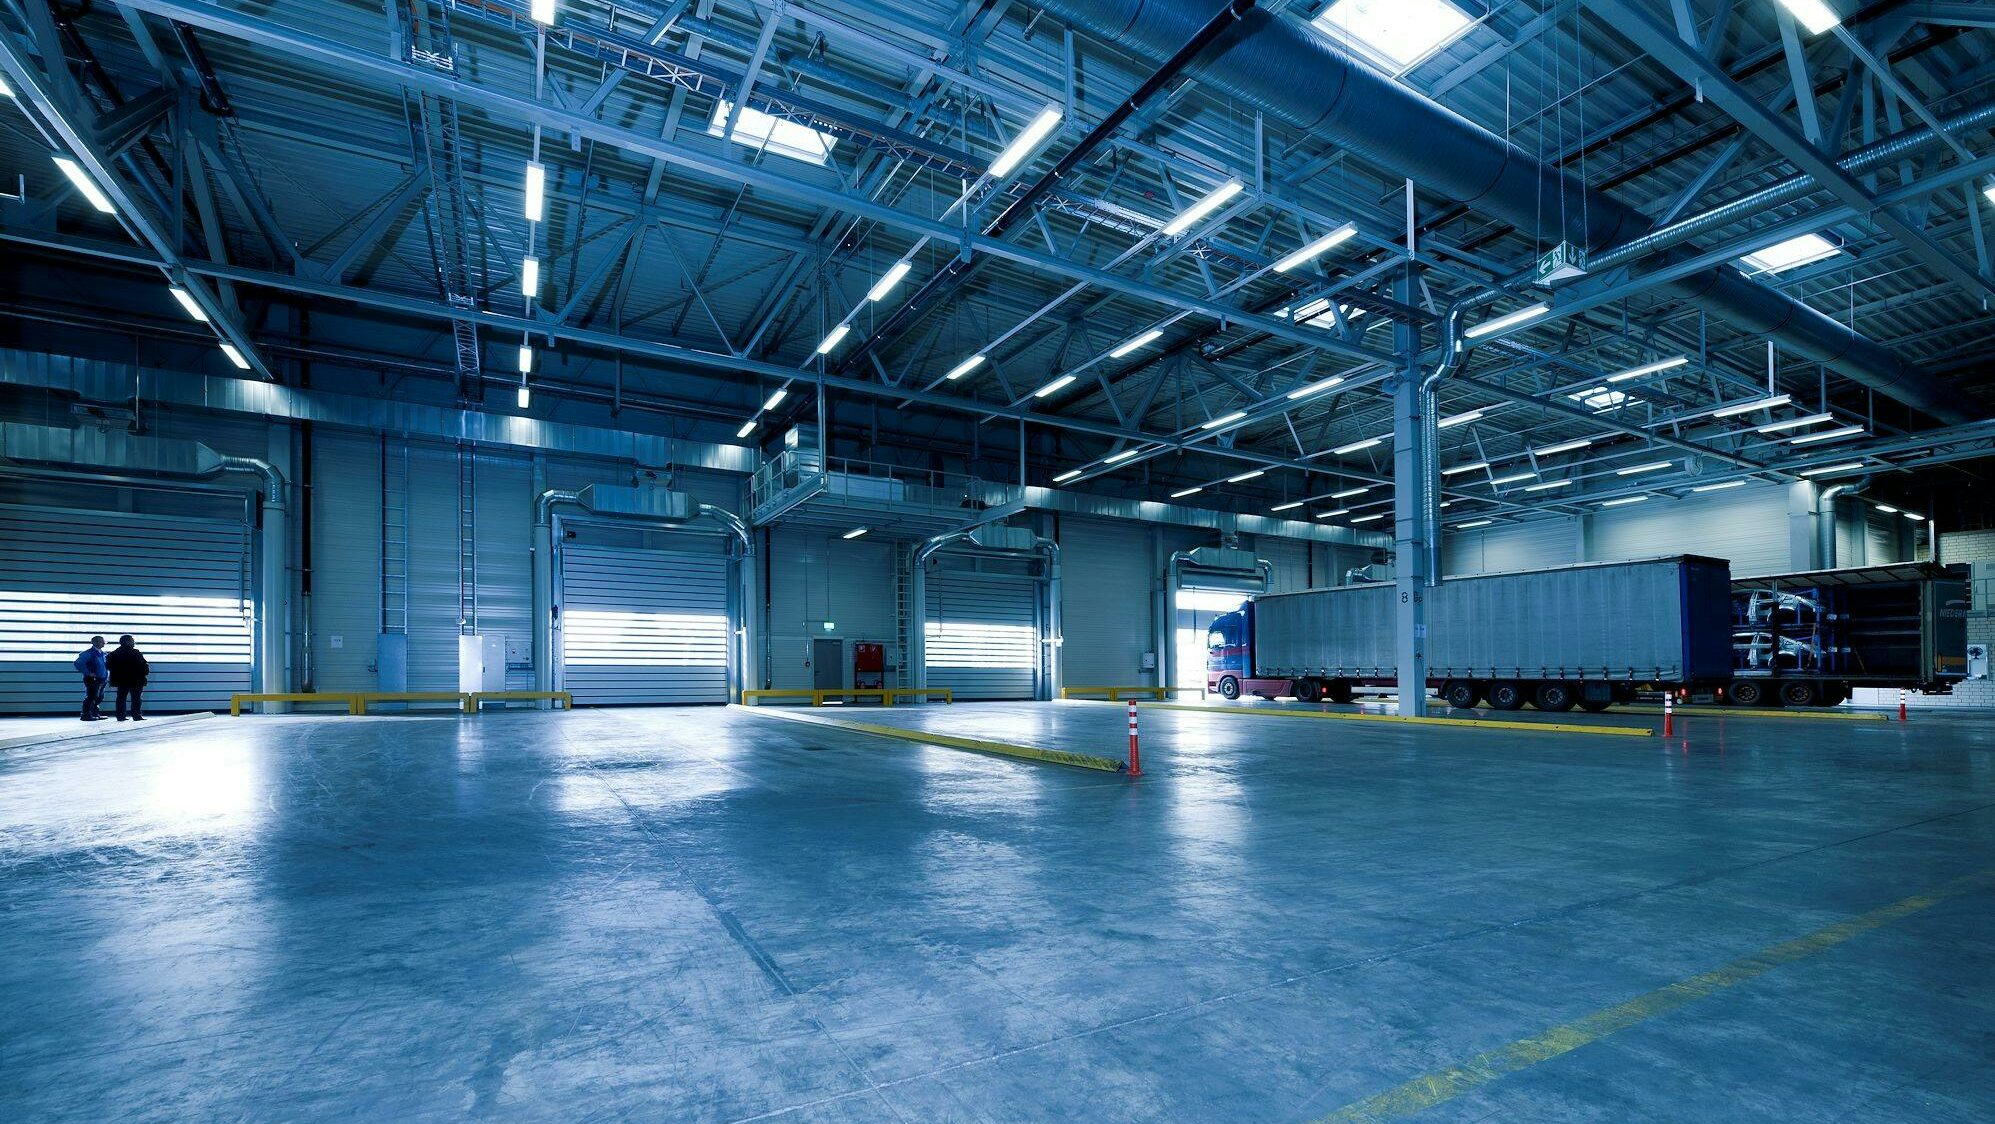 This is an image of an interior industrial space